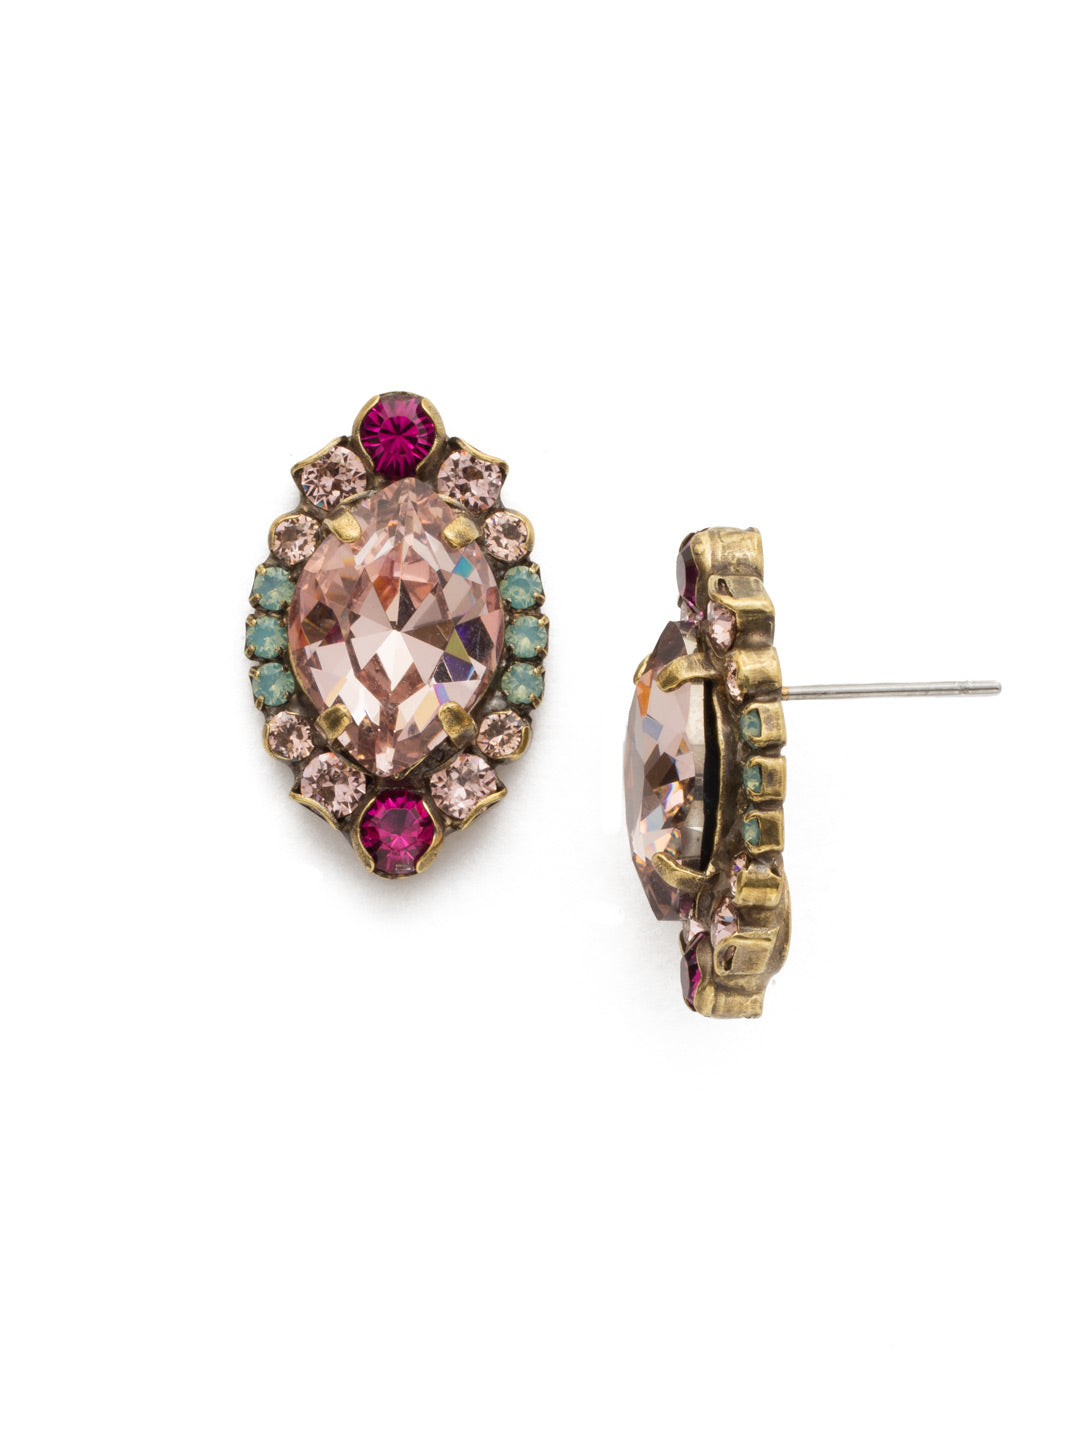 Eustoma Stud Earring - EDS44AGRS - A geometric gem surrounded by petite rounds of alternating colors. This fun stud earring offers just the right pop of sparkle.